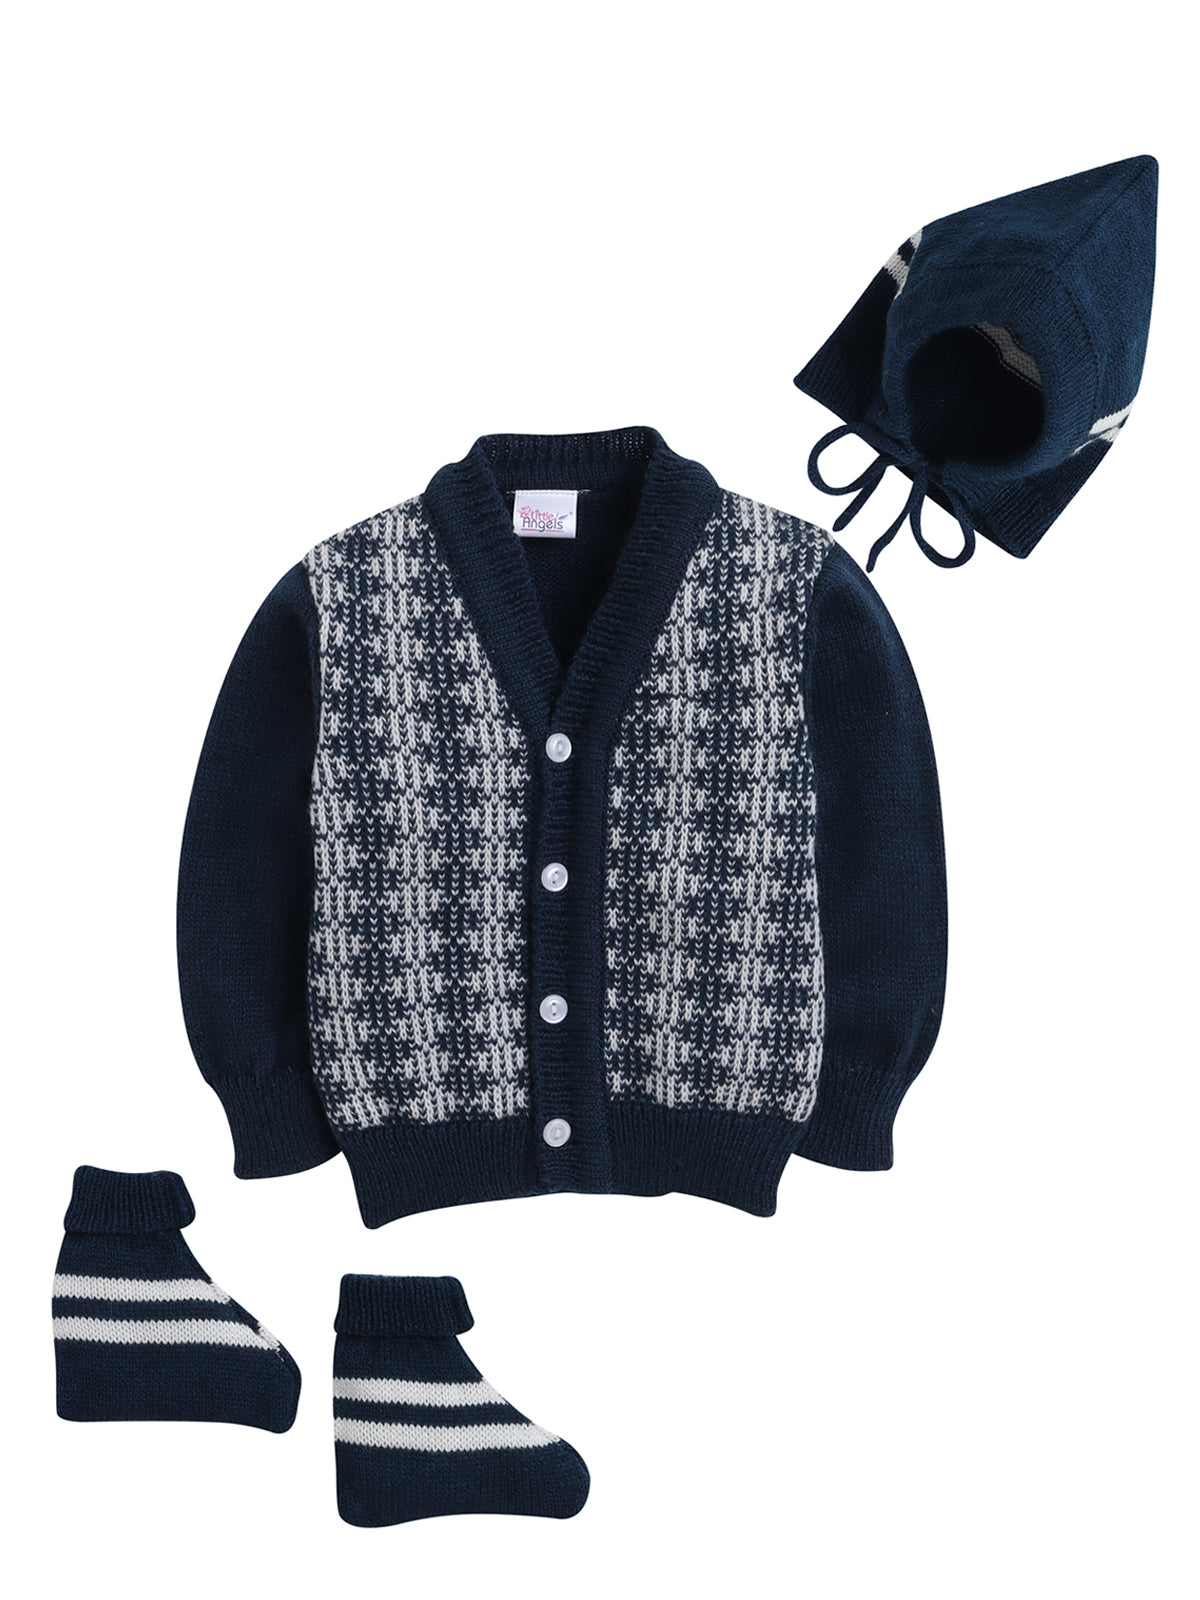 Full sleeves front open navy blue color sweater with matching cap and socks for baby